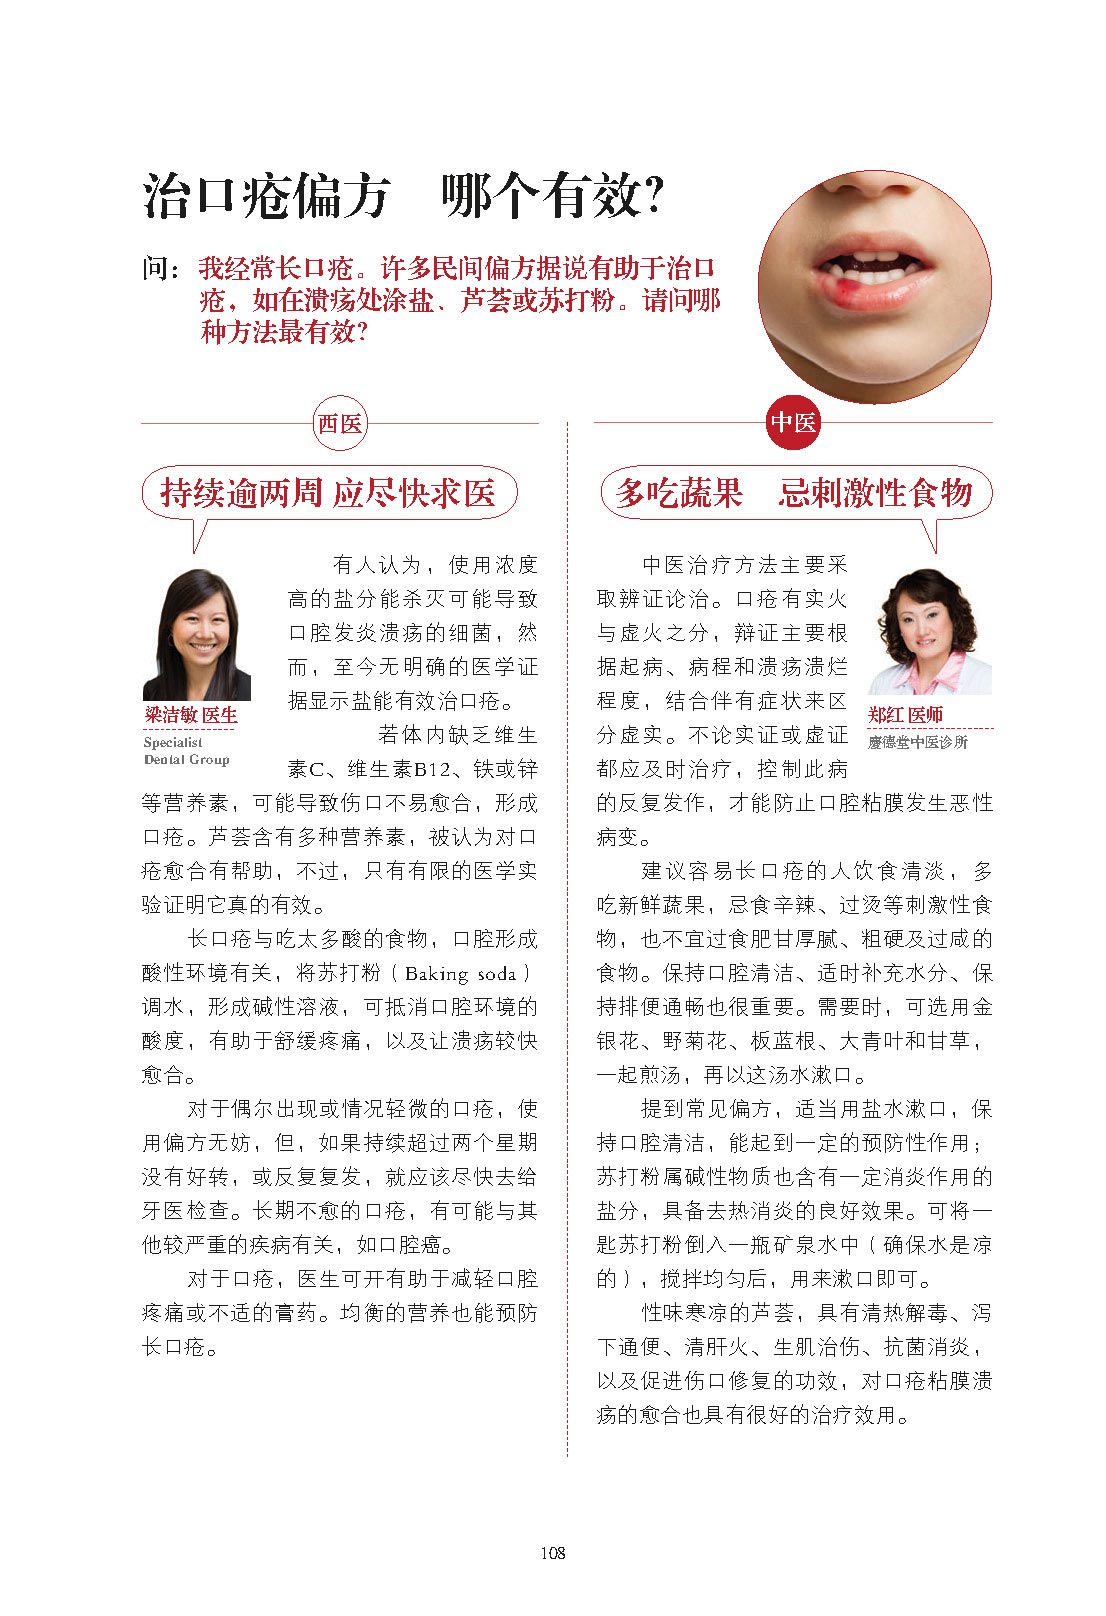 Health No.1, March 2015 issue: What are some effective remedies to treat mouth ulcers? (id)